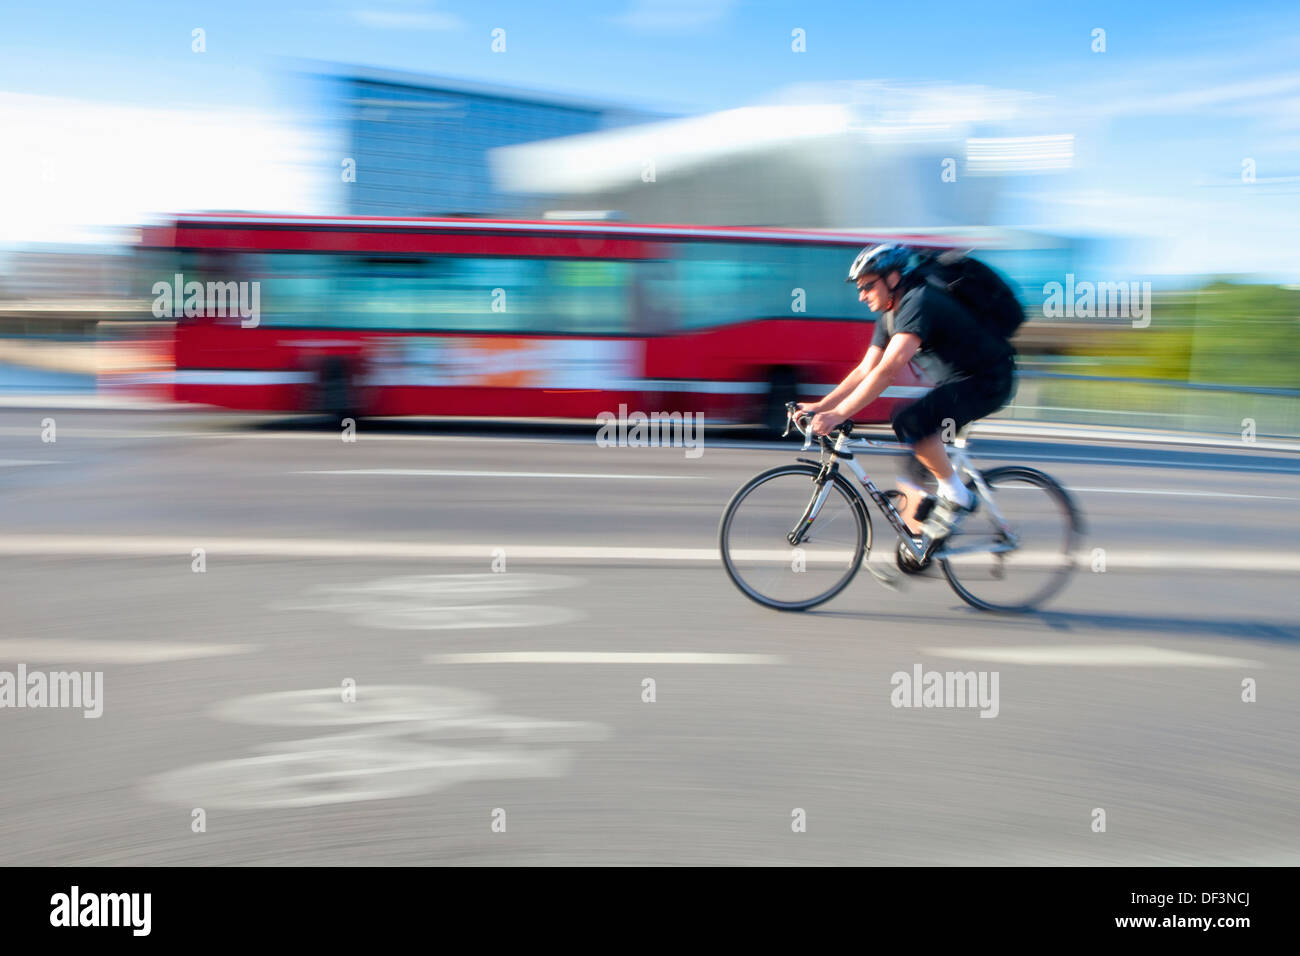 Sweden, Stockholm - bicyclist in a bike lane and a public transport bus. Stock Photo